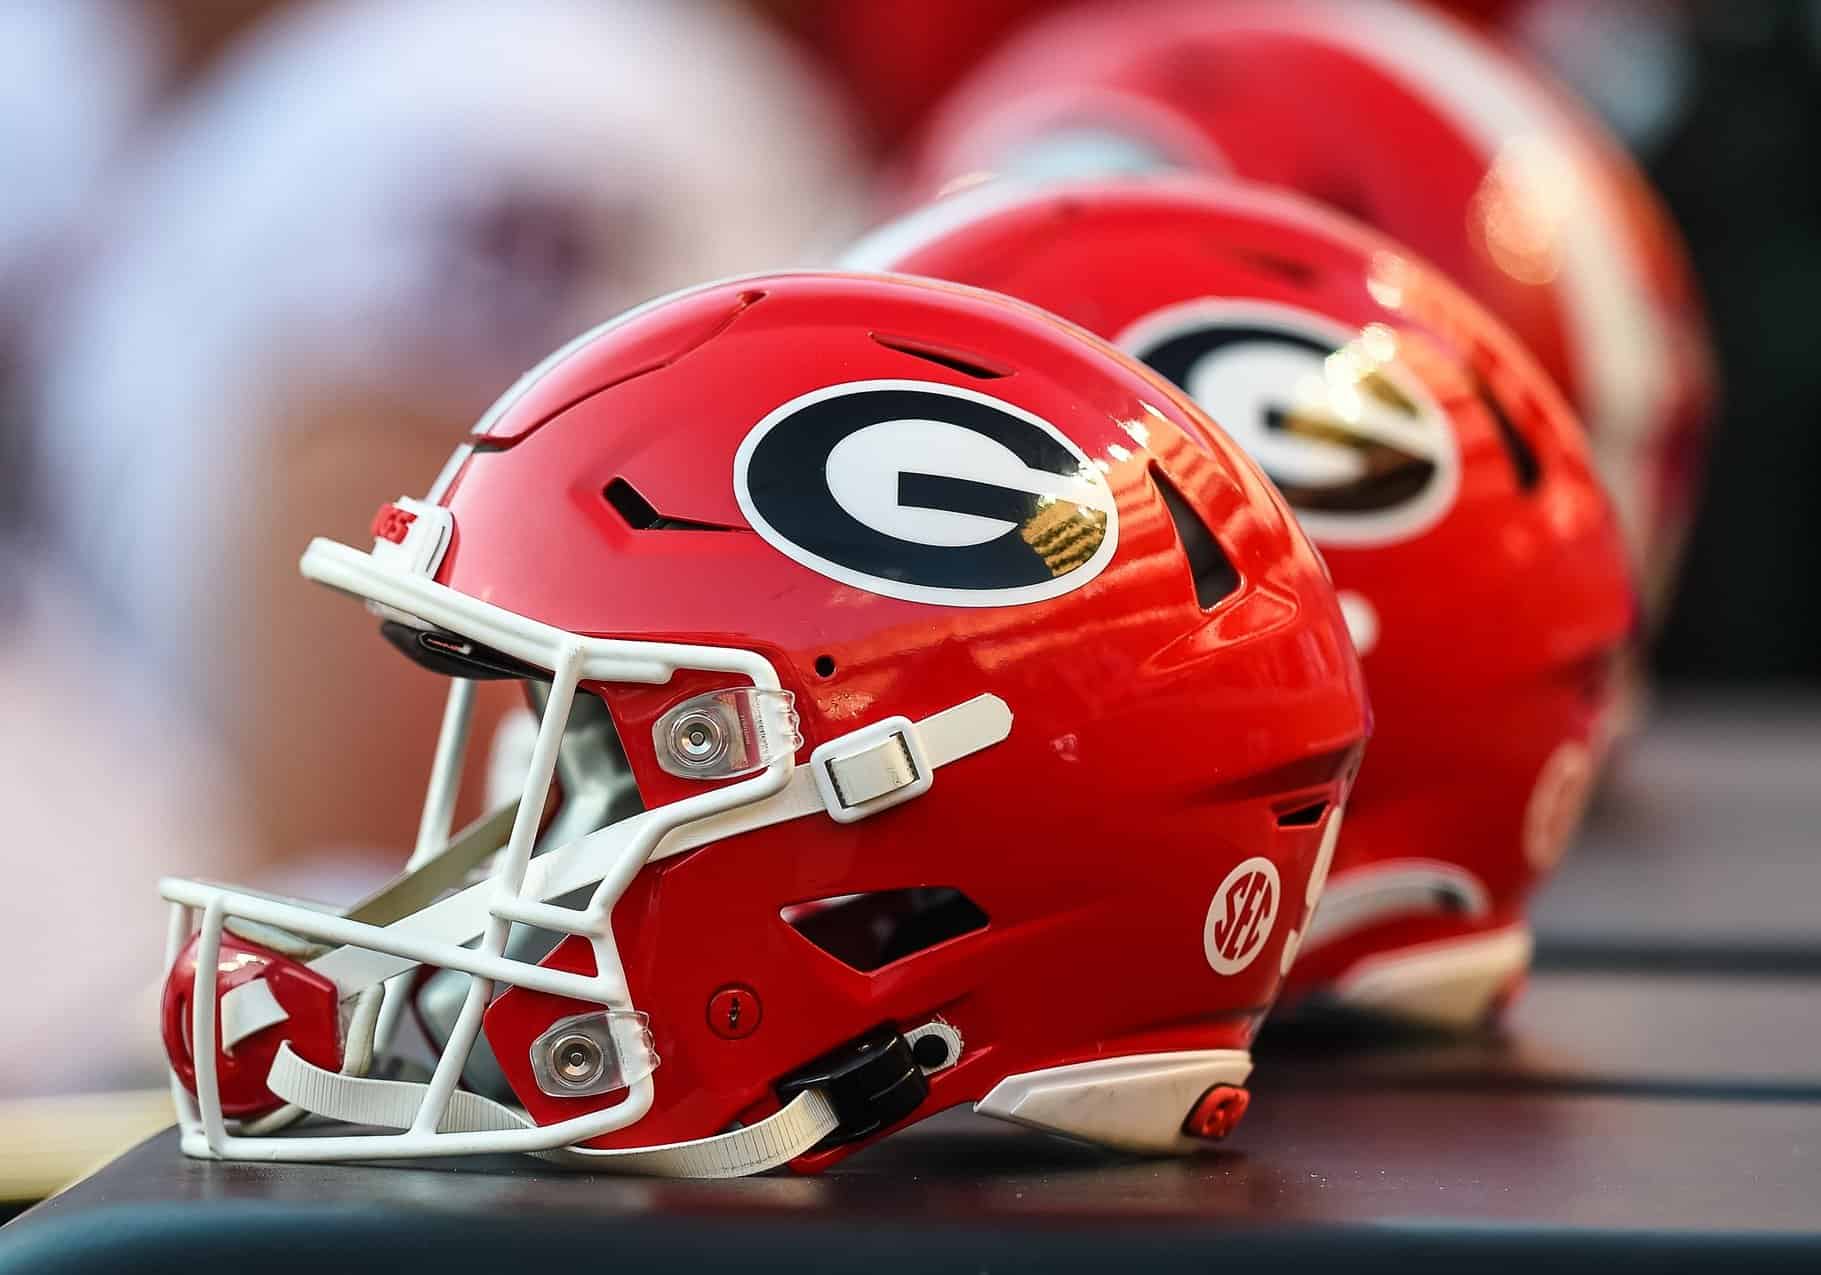 Georgia area sporting goods stores prepare for national championship game